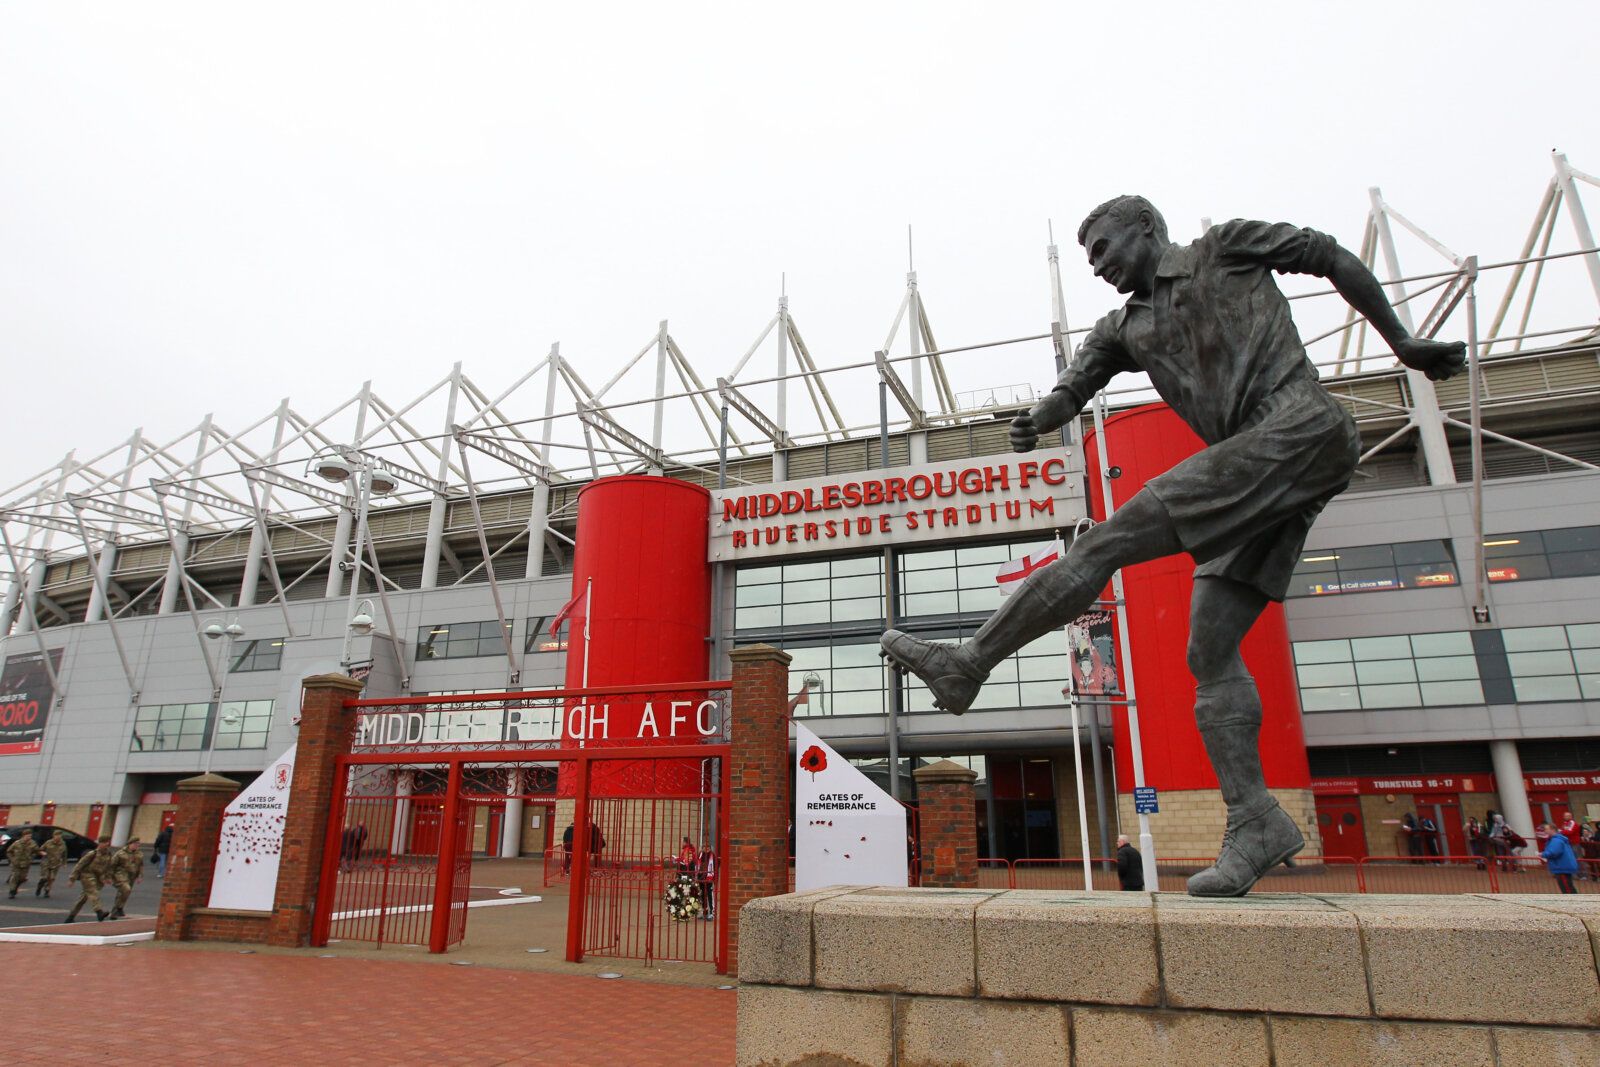 Football - Middlesbrough v AFC Bournemouth - Sky Bet Football League Championship - The Riverside Stadium - 14/15 - 8/11/14 
General view of statue of Wilf Mannion  
Mandatory Credit: Action Images / Ed Sykes 
EDITORIAL USE ONLY. No use with unauthorized audio, video, data, fixture lists, club/league logos or 